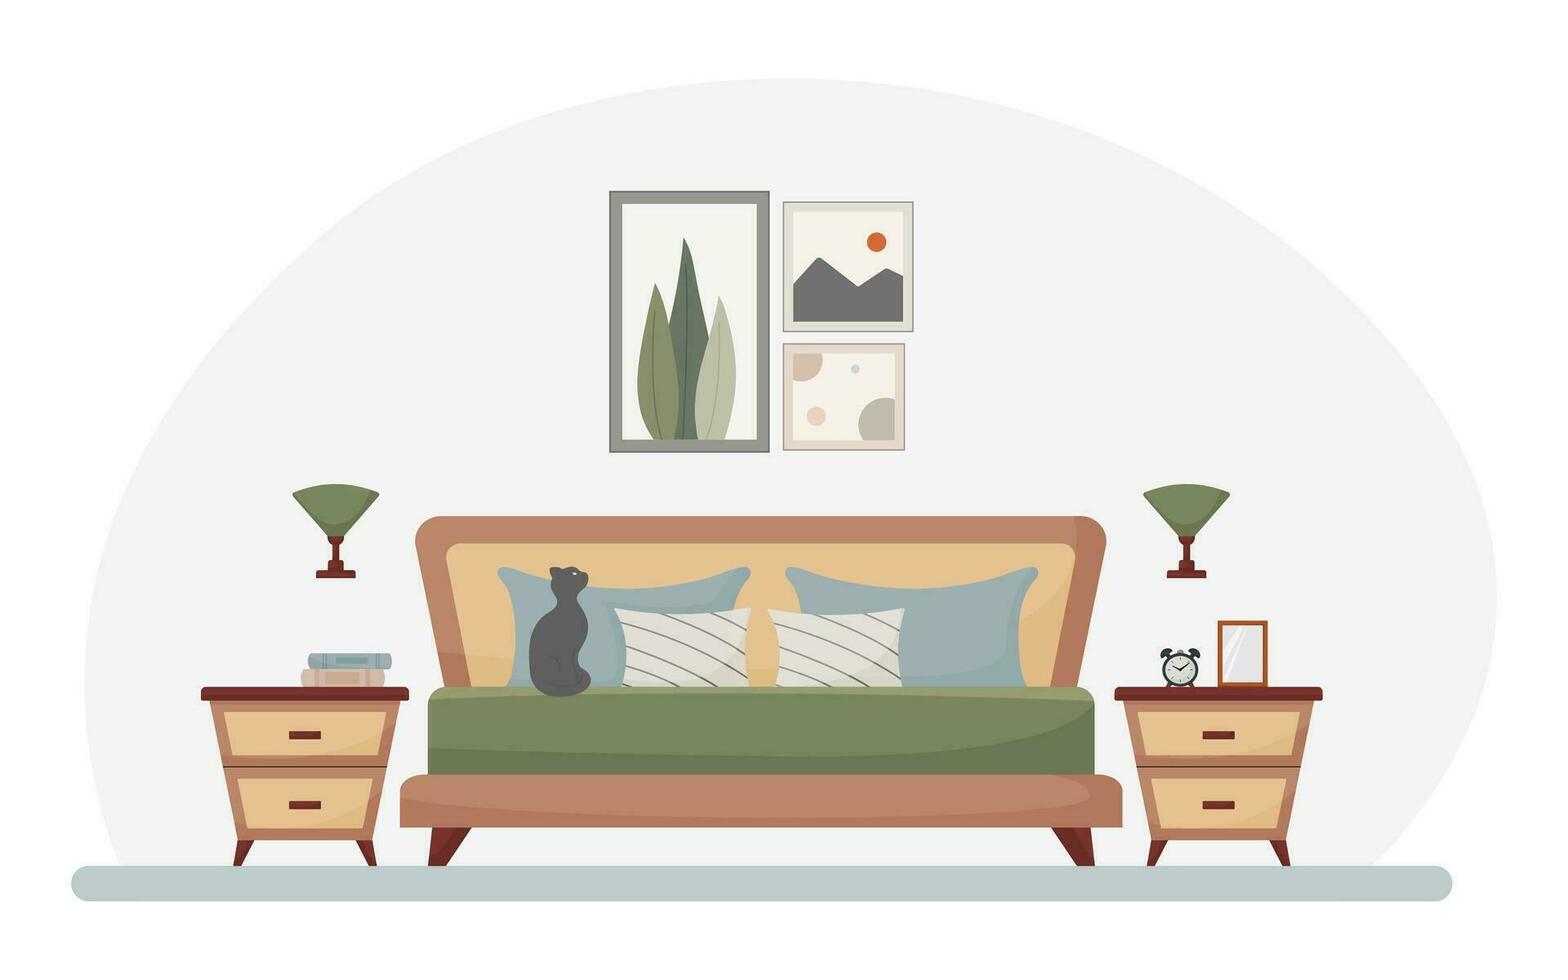 bedroom interior design, cozy home, flat style vector illustration, bed, bedside table, lamp, alarm clock, pillow